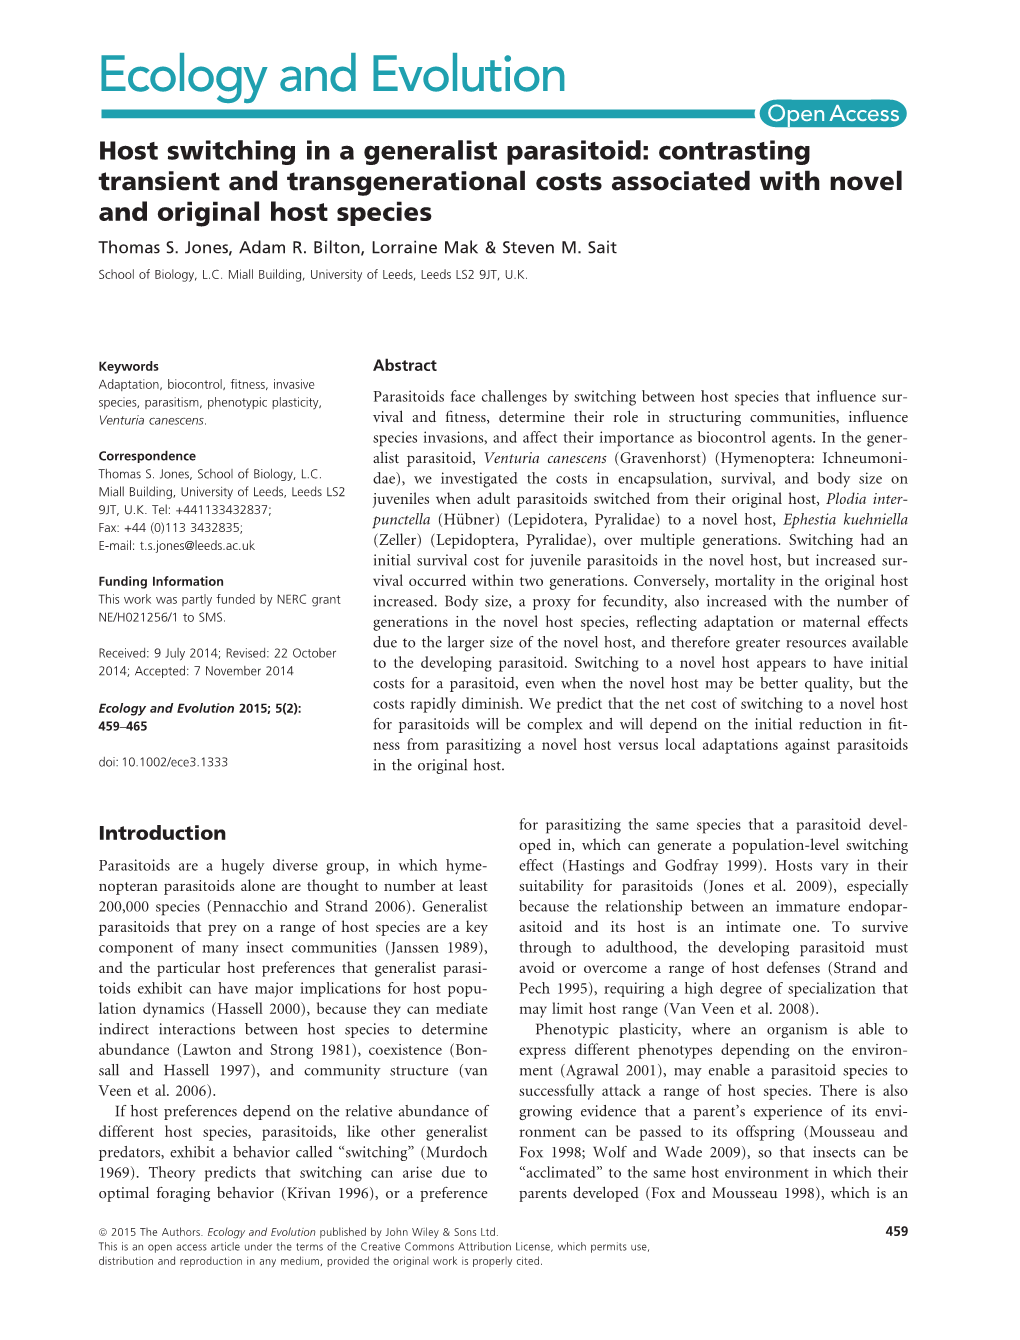 Host Switching in a Generalist Parasitoid: Contrasting Transient and Transgenerational Costs Associated with Novel and Original Host Species Thomas S